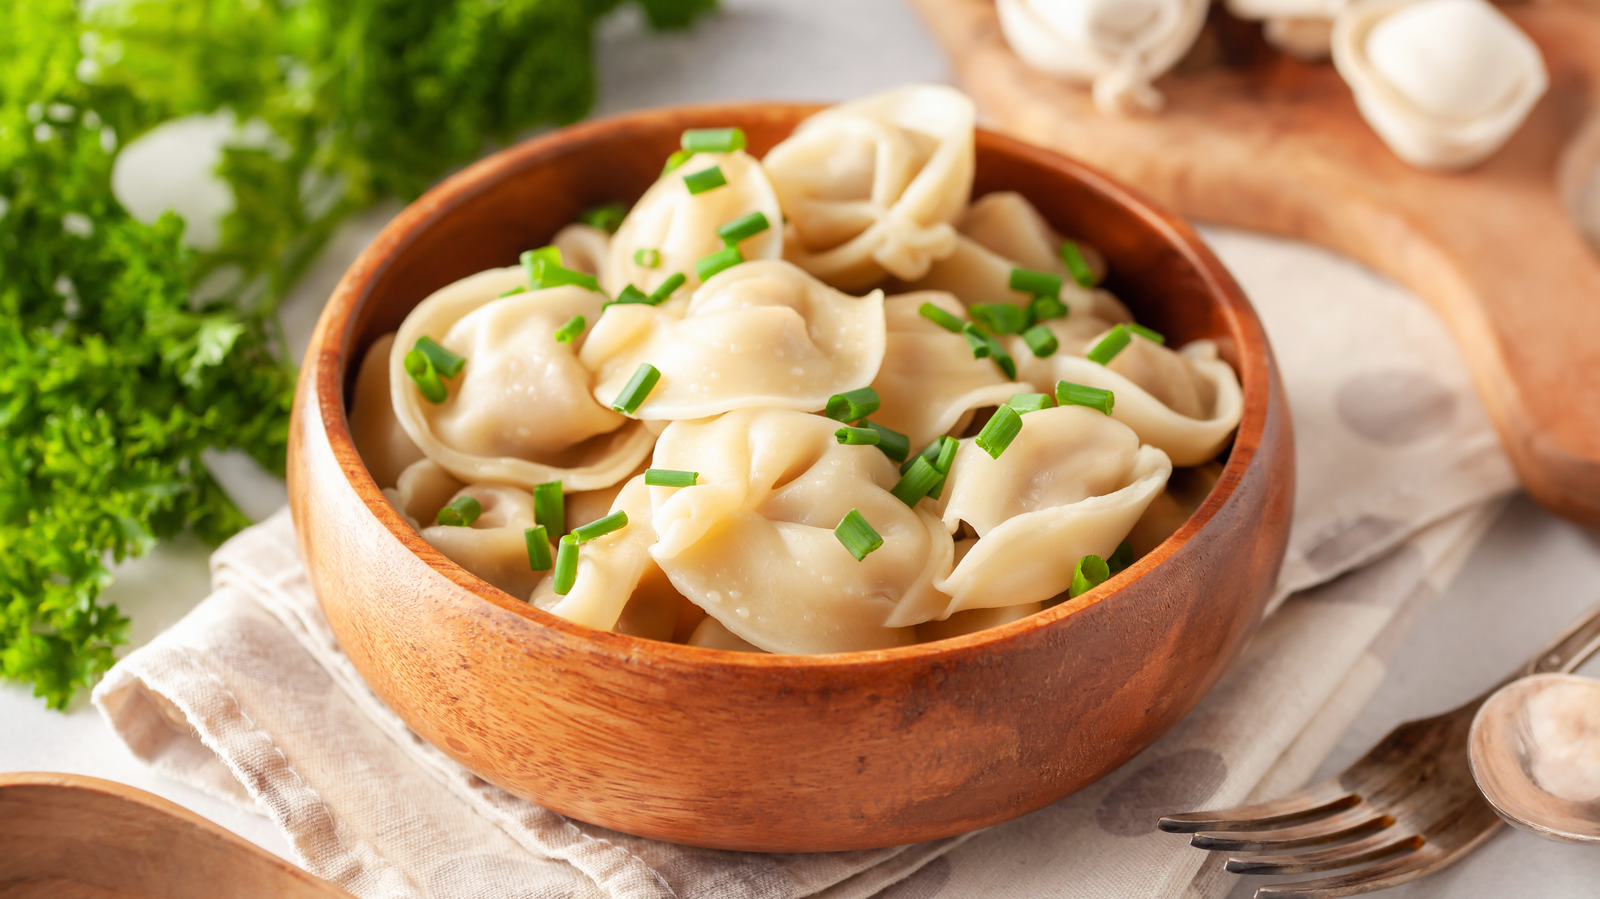 2 Simple Ways Russian Pelmeni Are Commonly Served